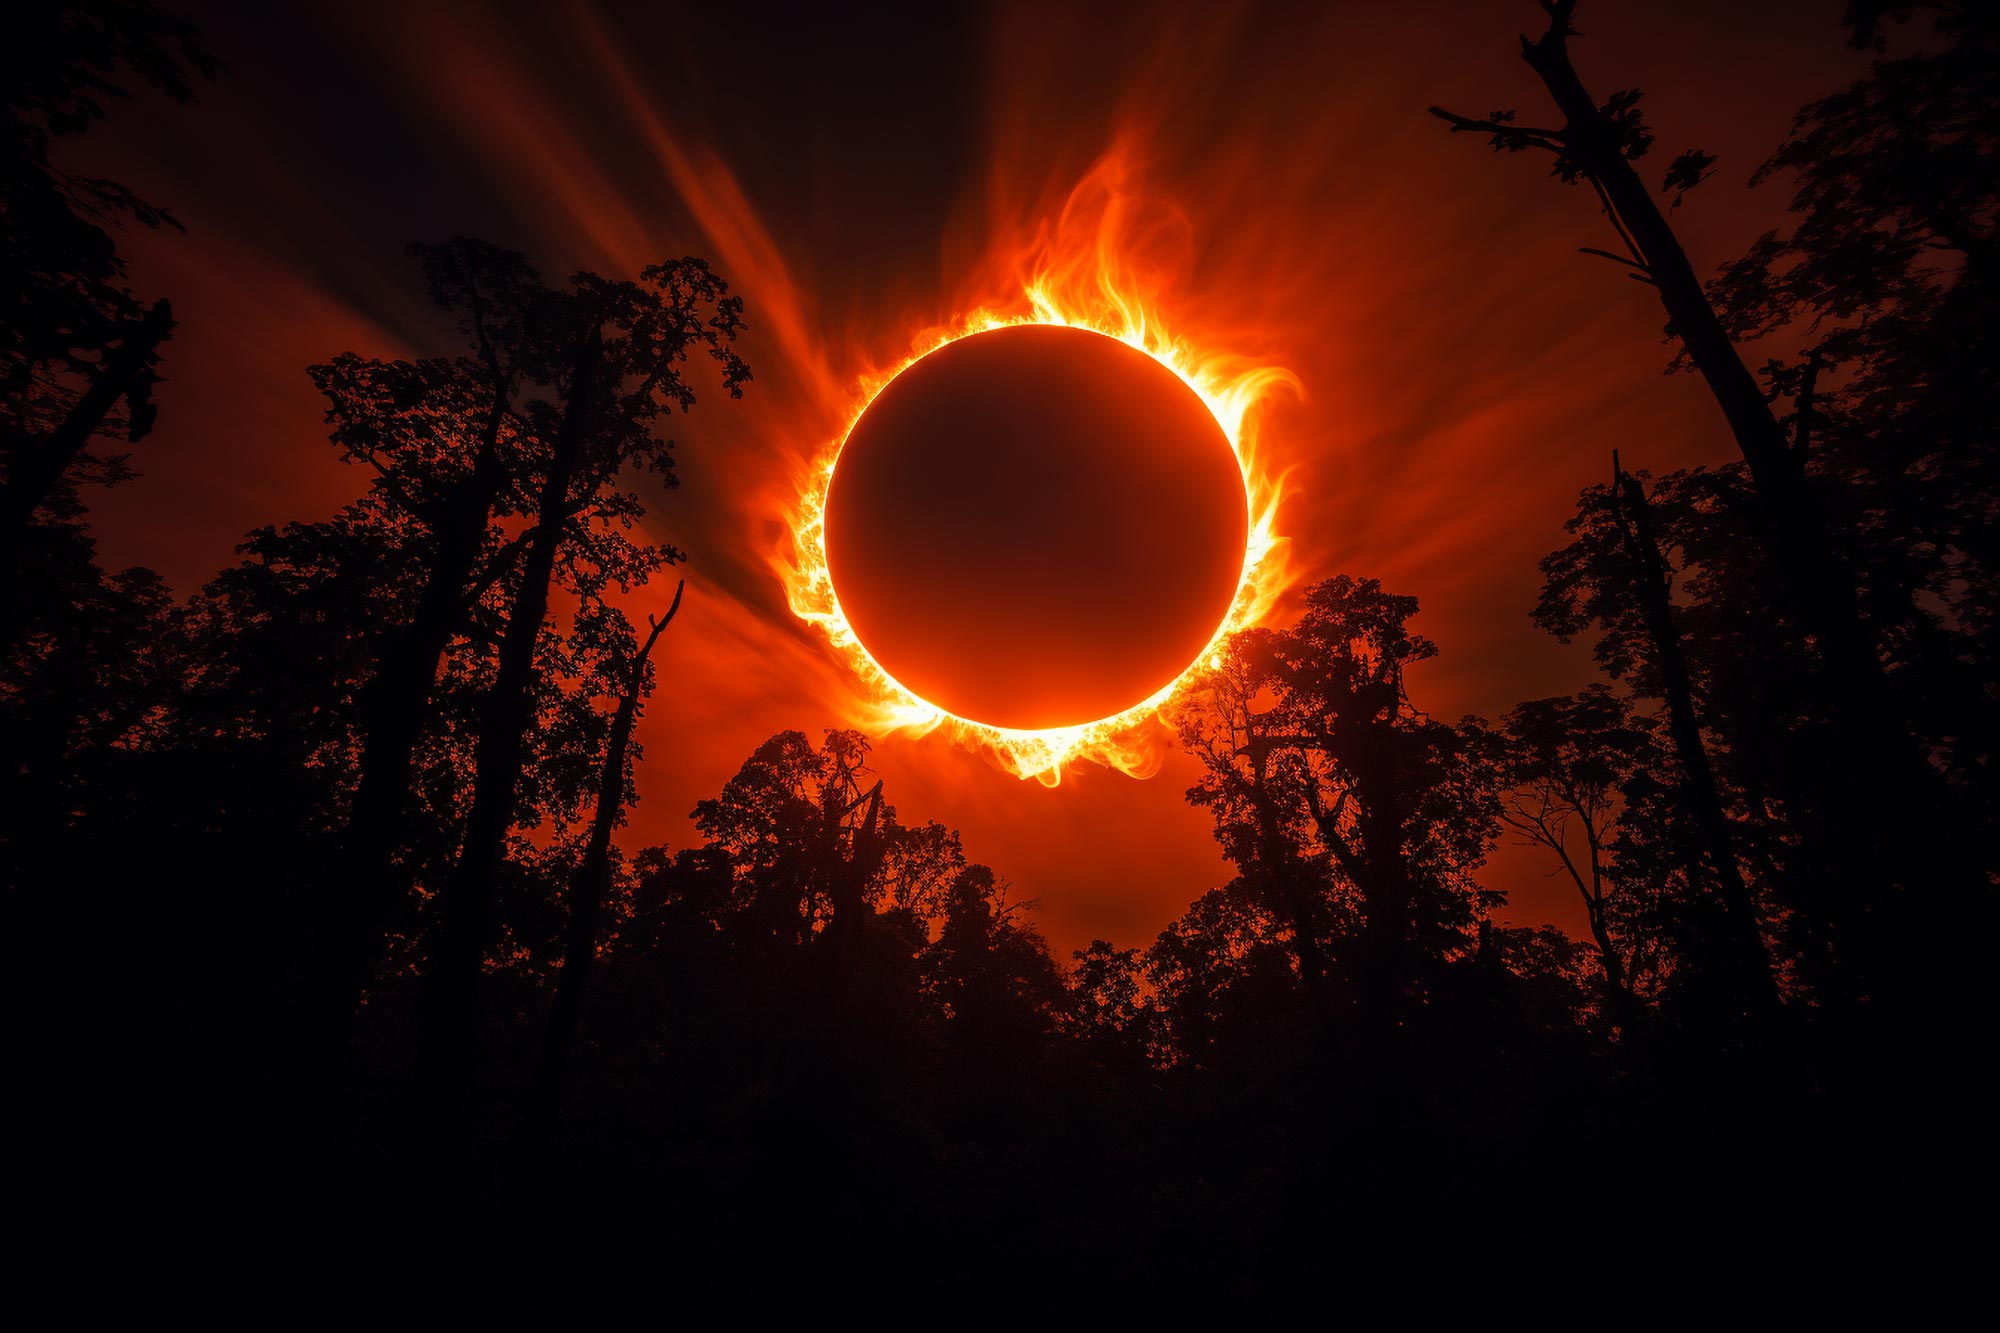 Five NASA Tips for Photographing the “Ring of Fire” Solar Eclipse Easy Reader